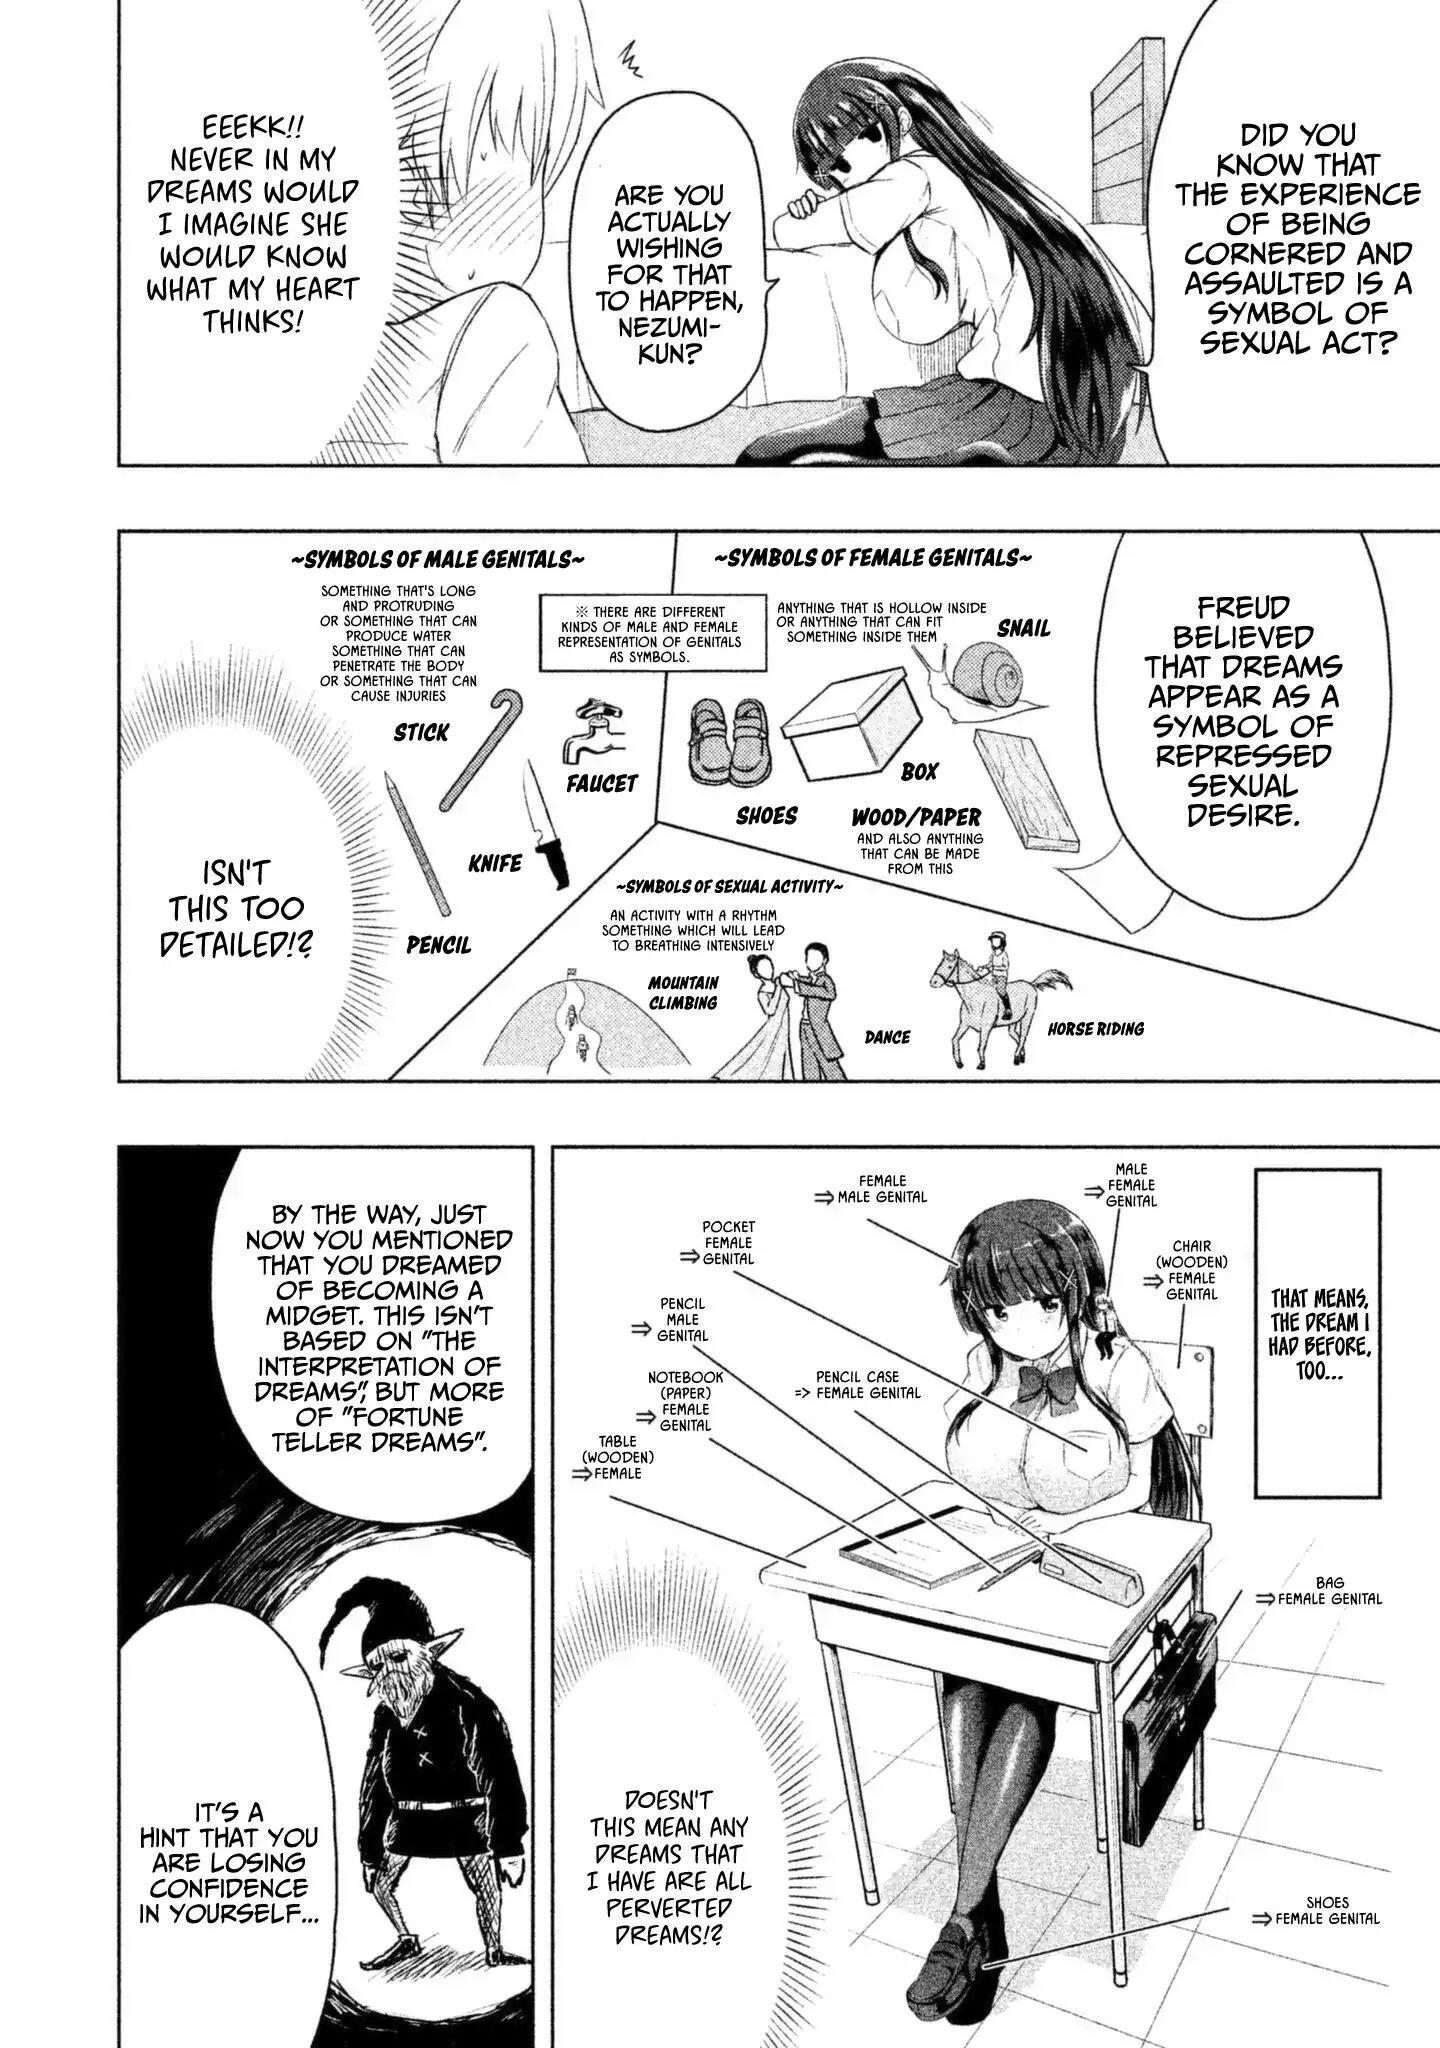 A Girl Who Is Very Well-Informed About Weird Knowledge, Takayukashiki Souko-San Vol.1 Chapter 12: Dream page 7 - Mangakakalots.com